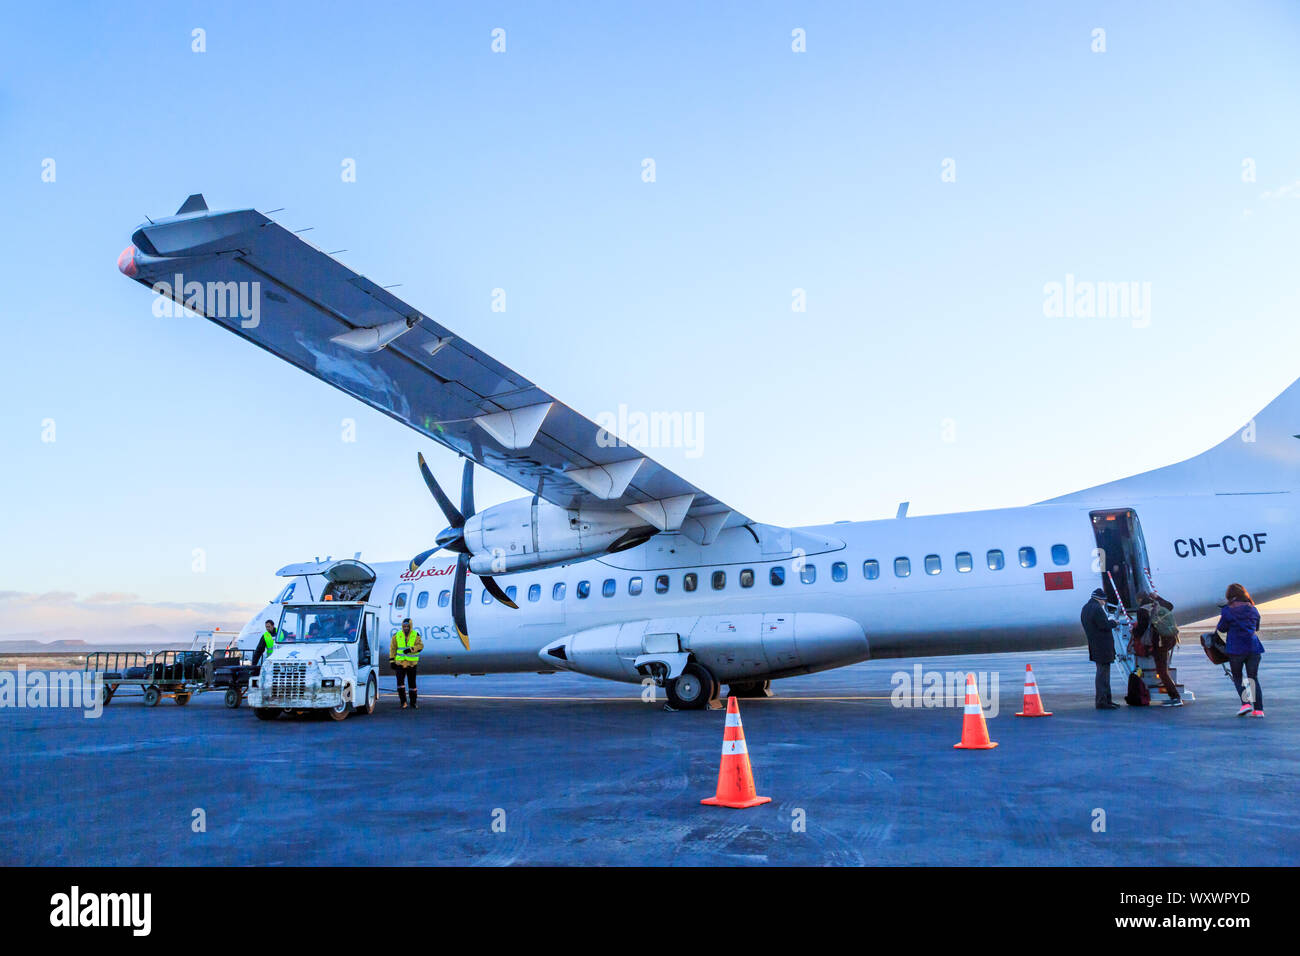 Ouarzazate, Morocco - Feb 28, 2016: agents of the airline charges passengers' luggages in the hold of the airliner while the passengers ride through t Stock Photo